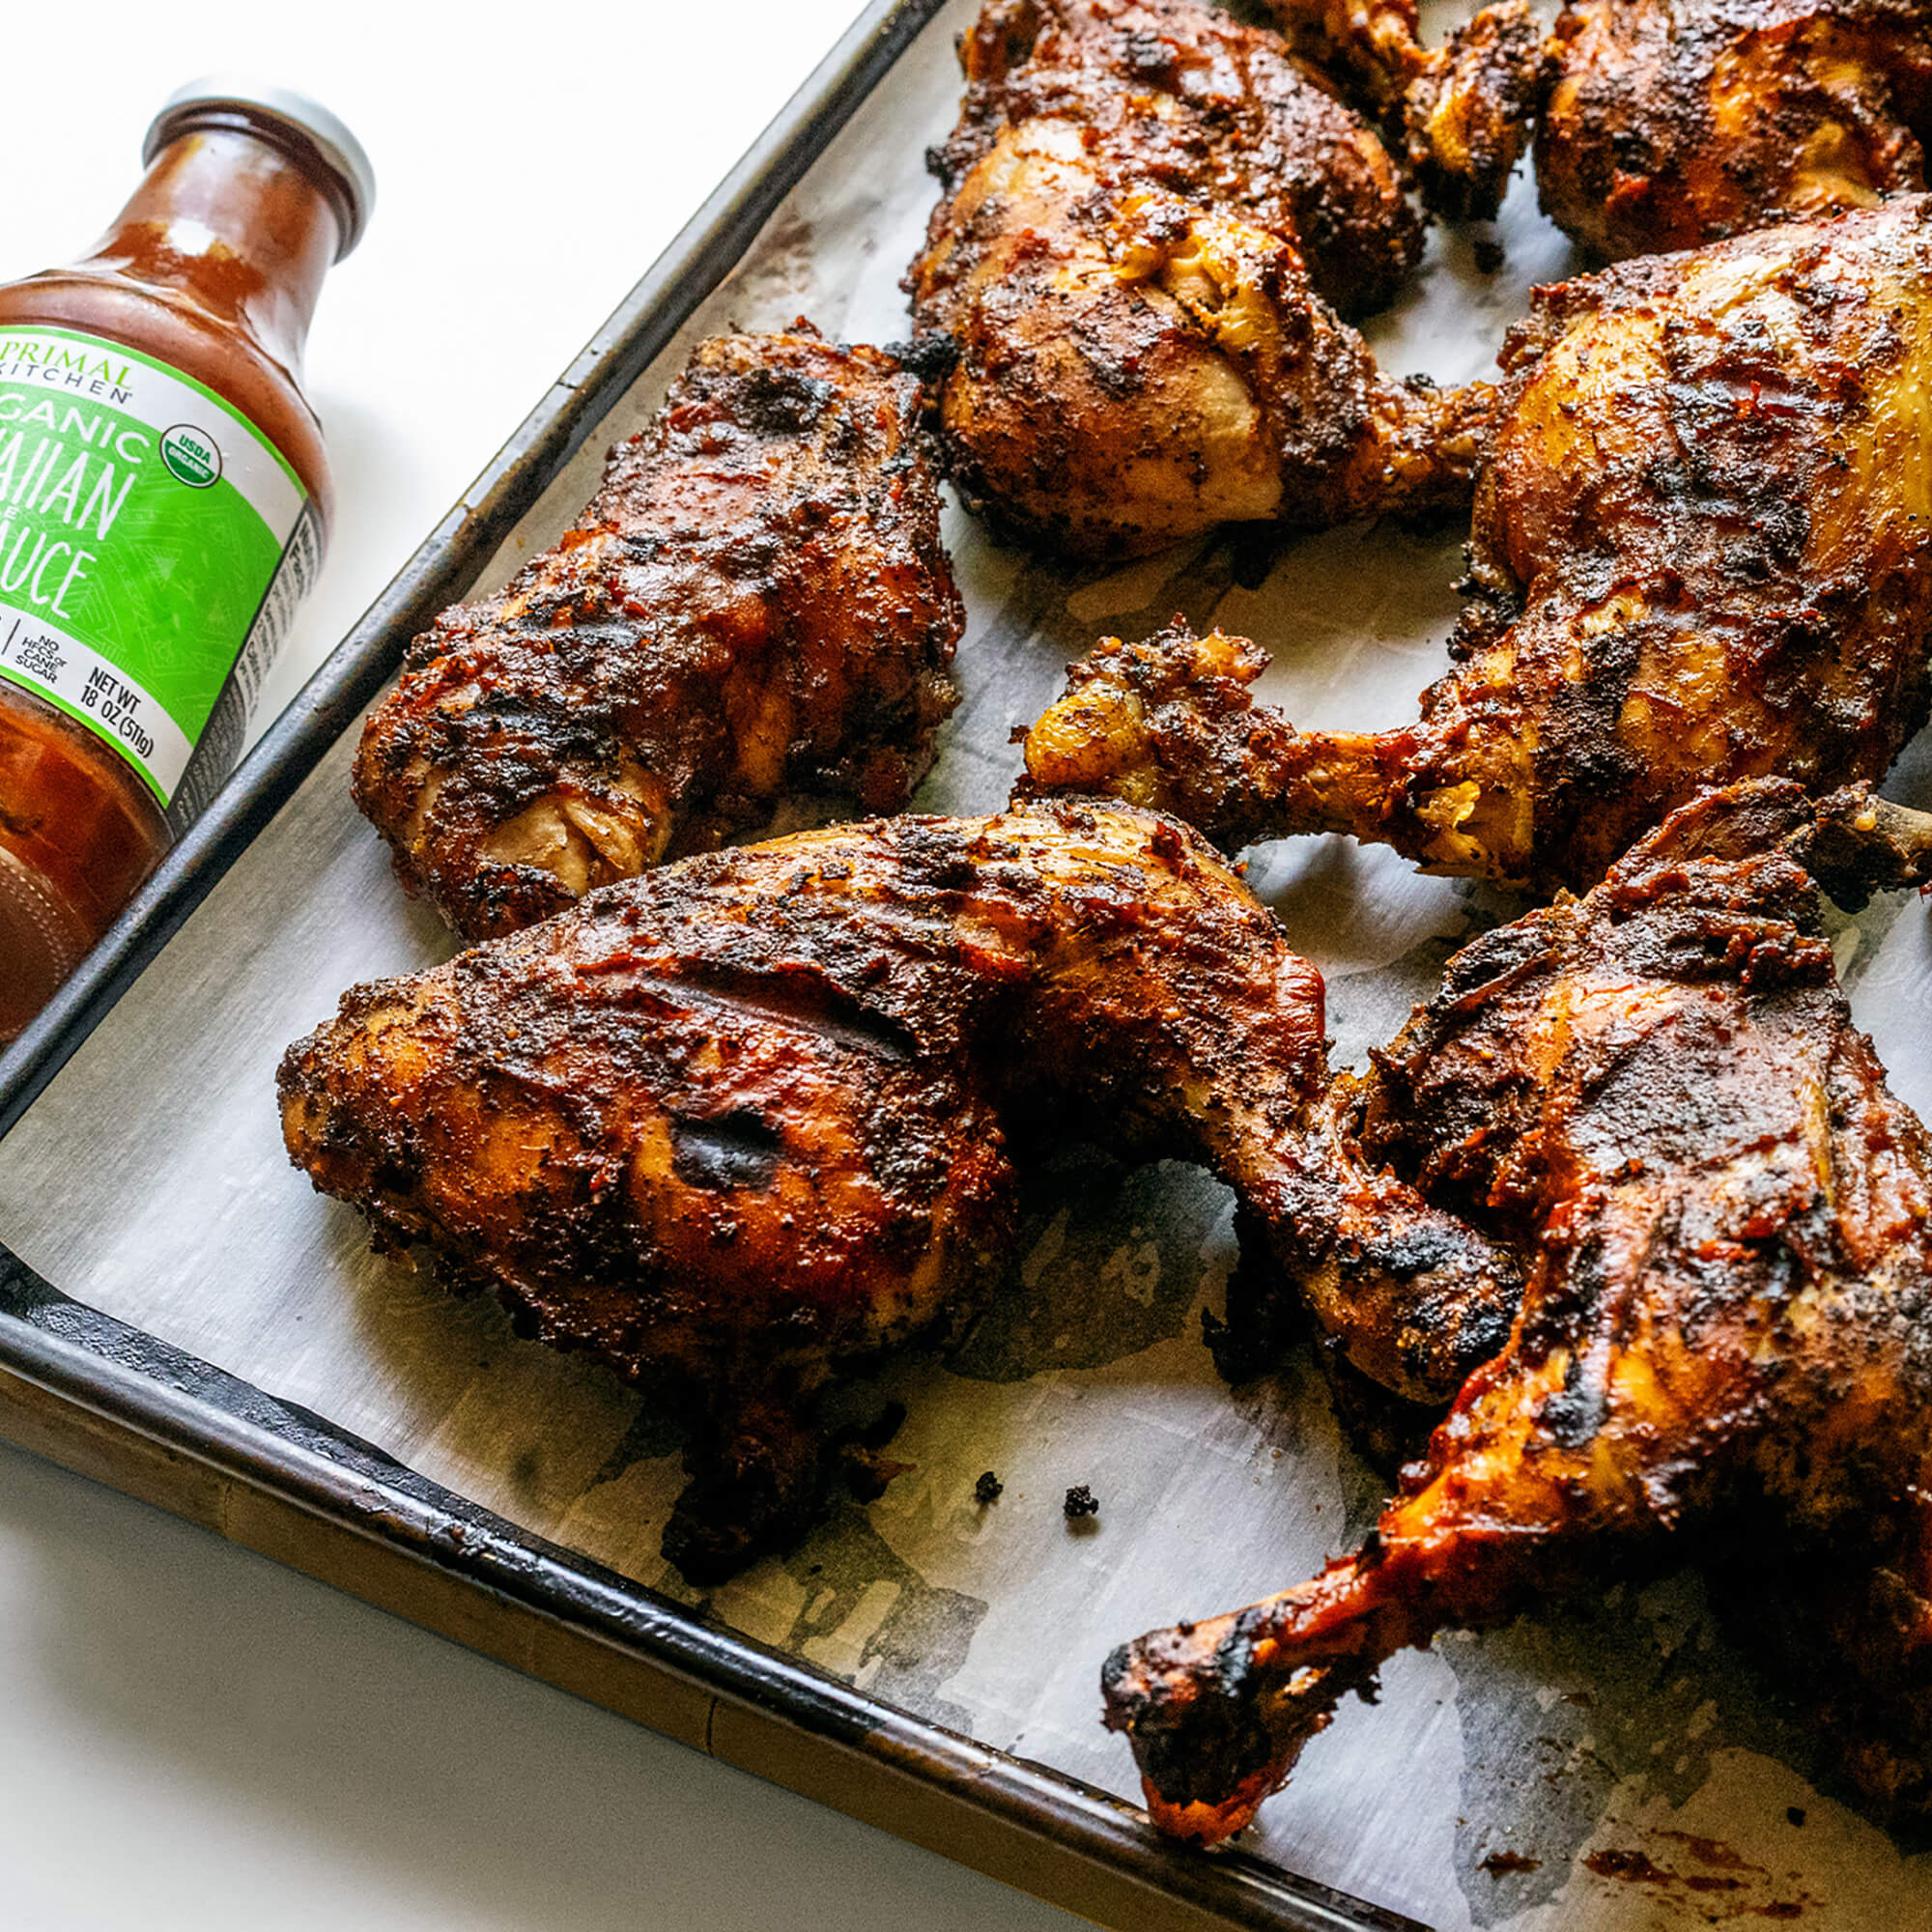 Hawaiian BBC Chicken Thighs on a sheet pan with Primal Kitchen Organic Hawaiian BBQ Sauce bottle in the background